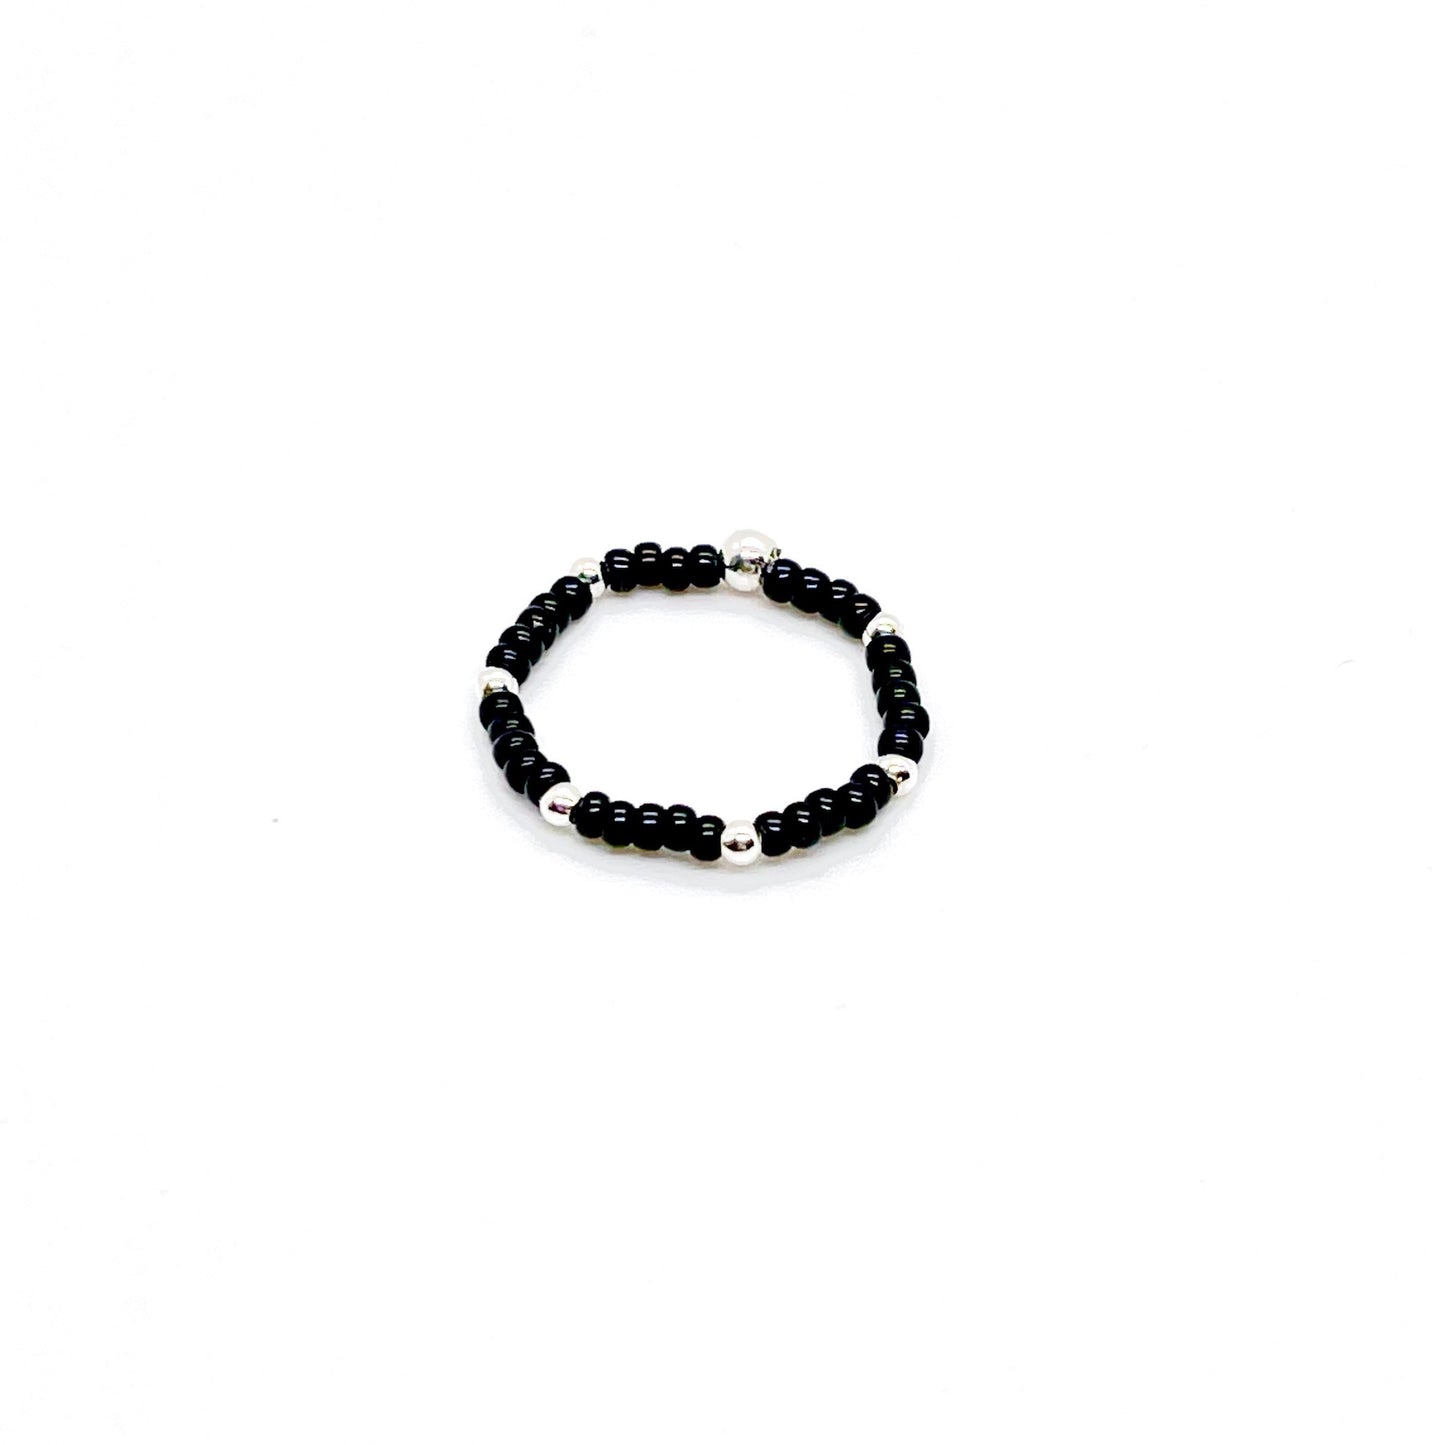 Stretch ring | Black seed bead ring with 2mm sterling silver accent ball beads.